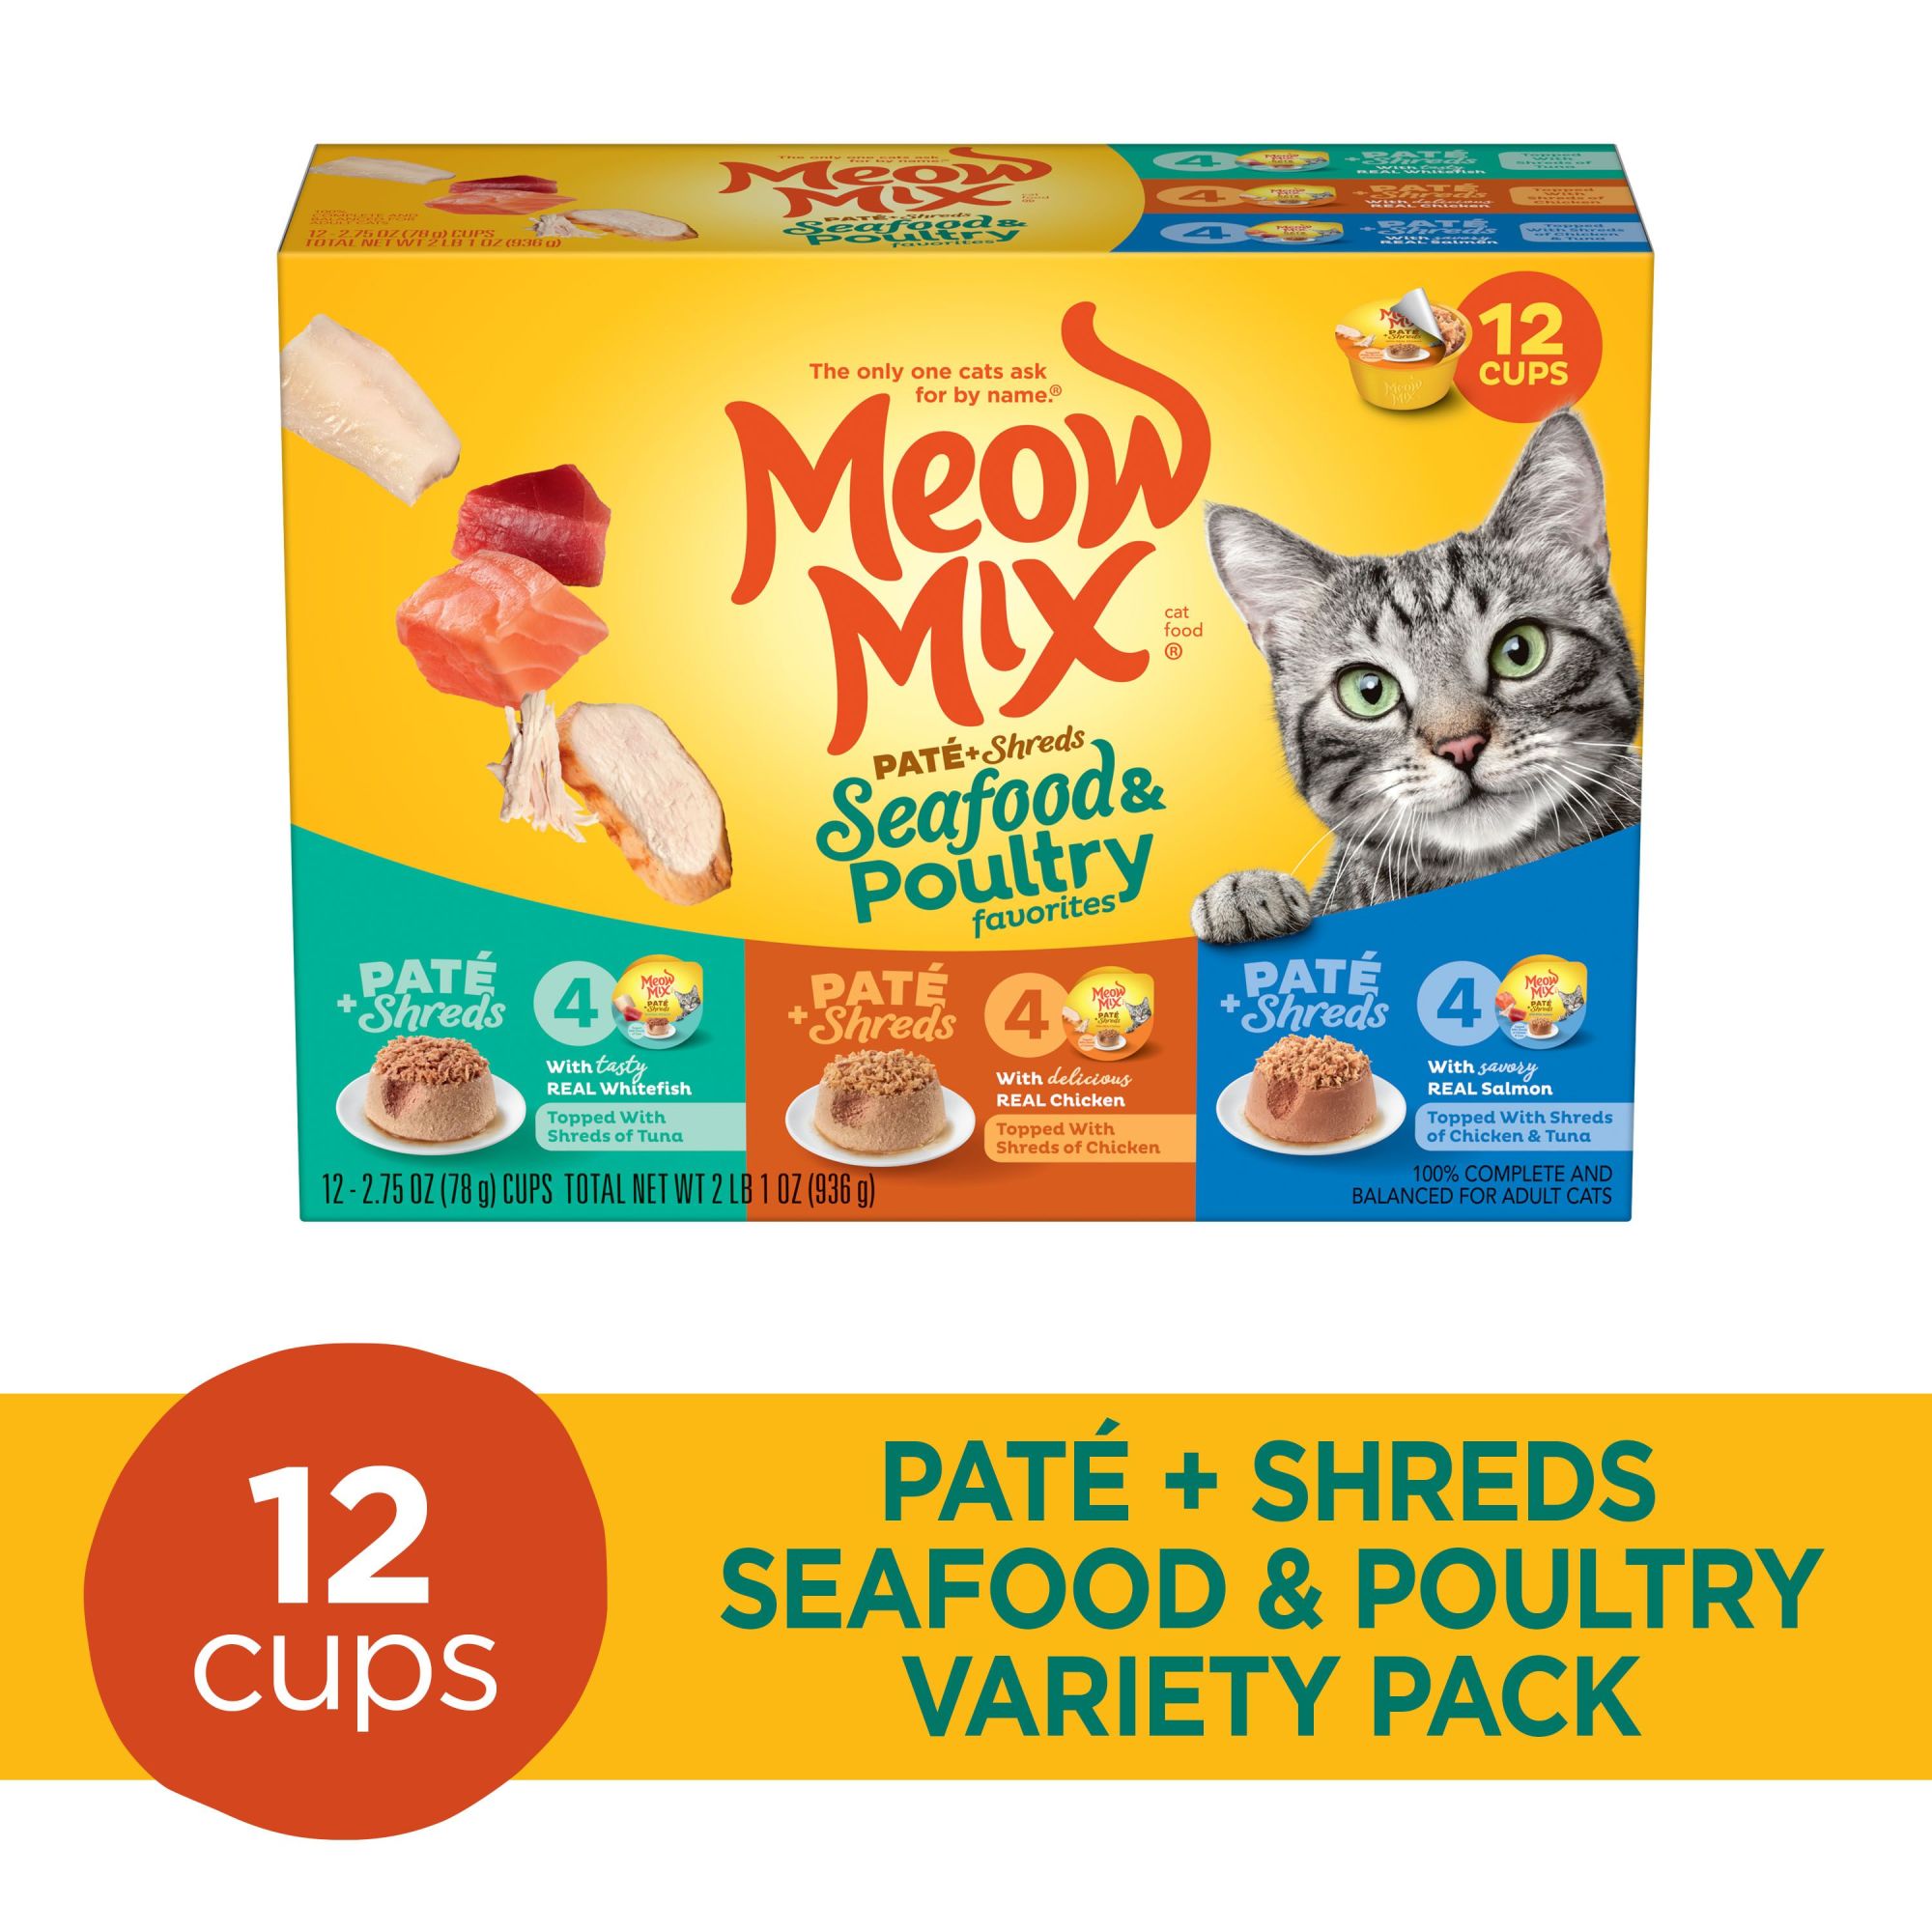 Meow Mix Pate Toppers Seafood & Poultry Variety Pack Wet Cat Food, 12 Cups - image 5 of 8